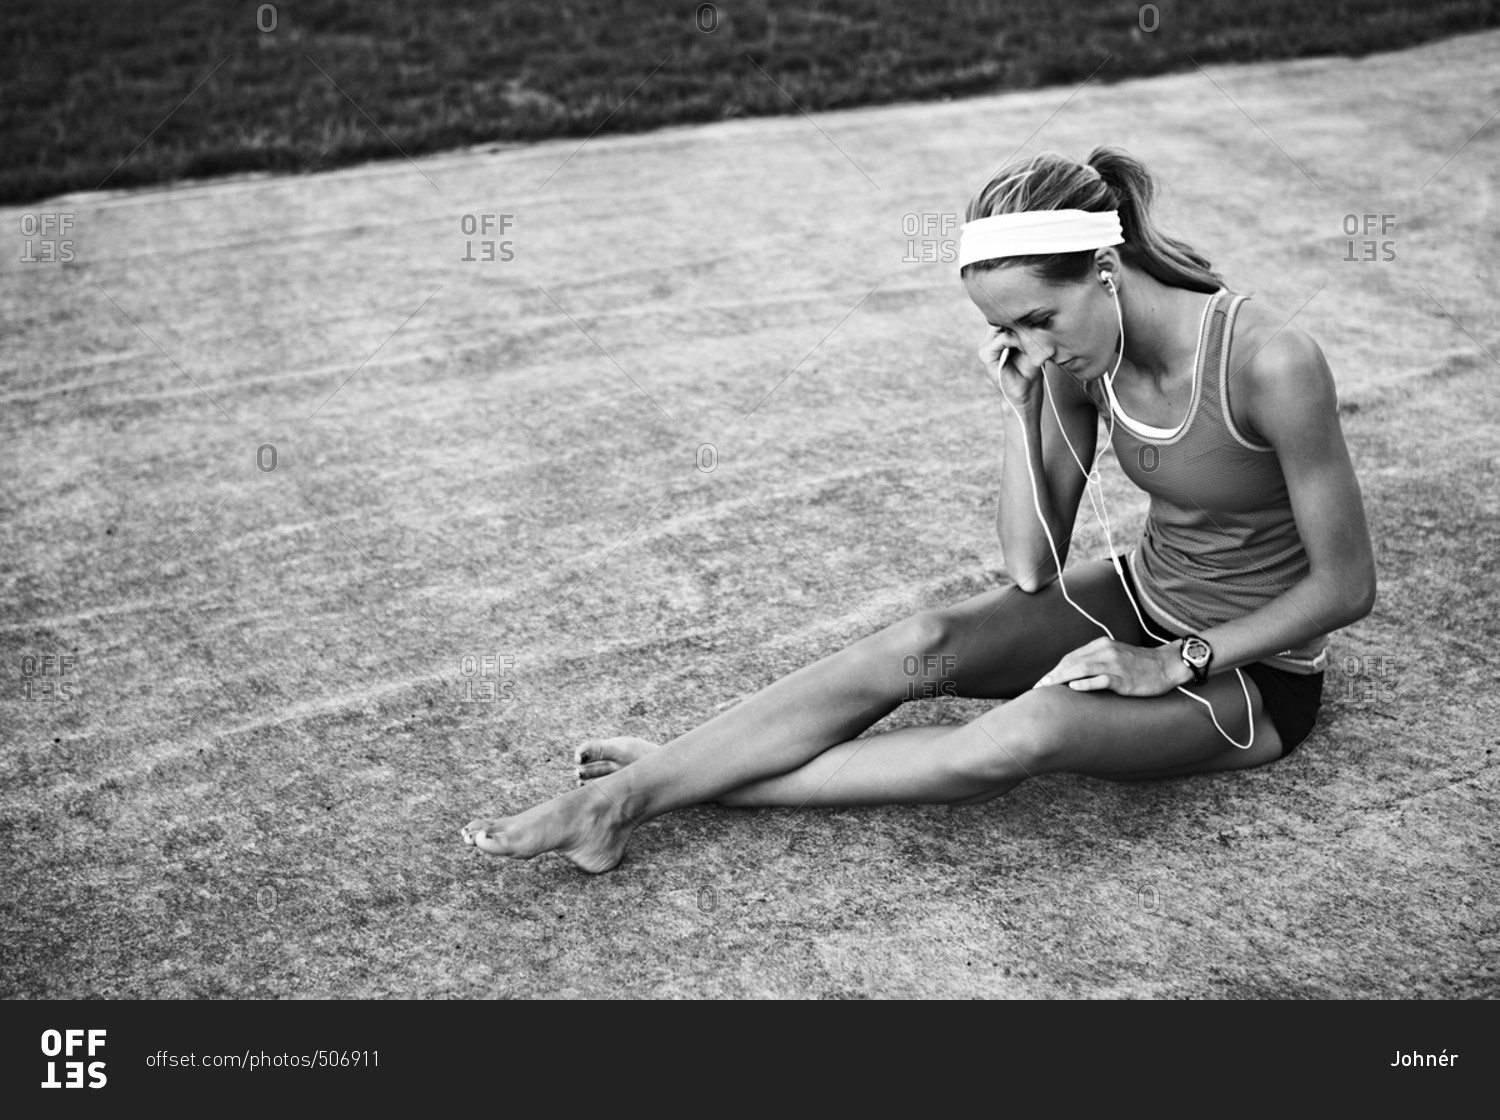 Young woman listening to music on sports track